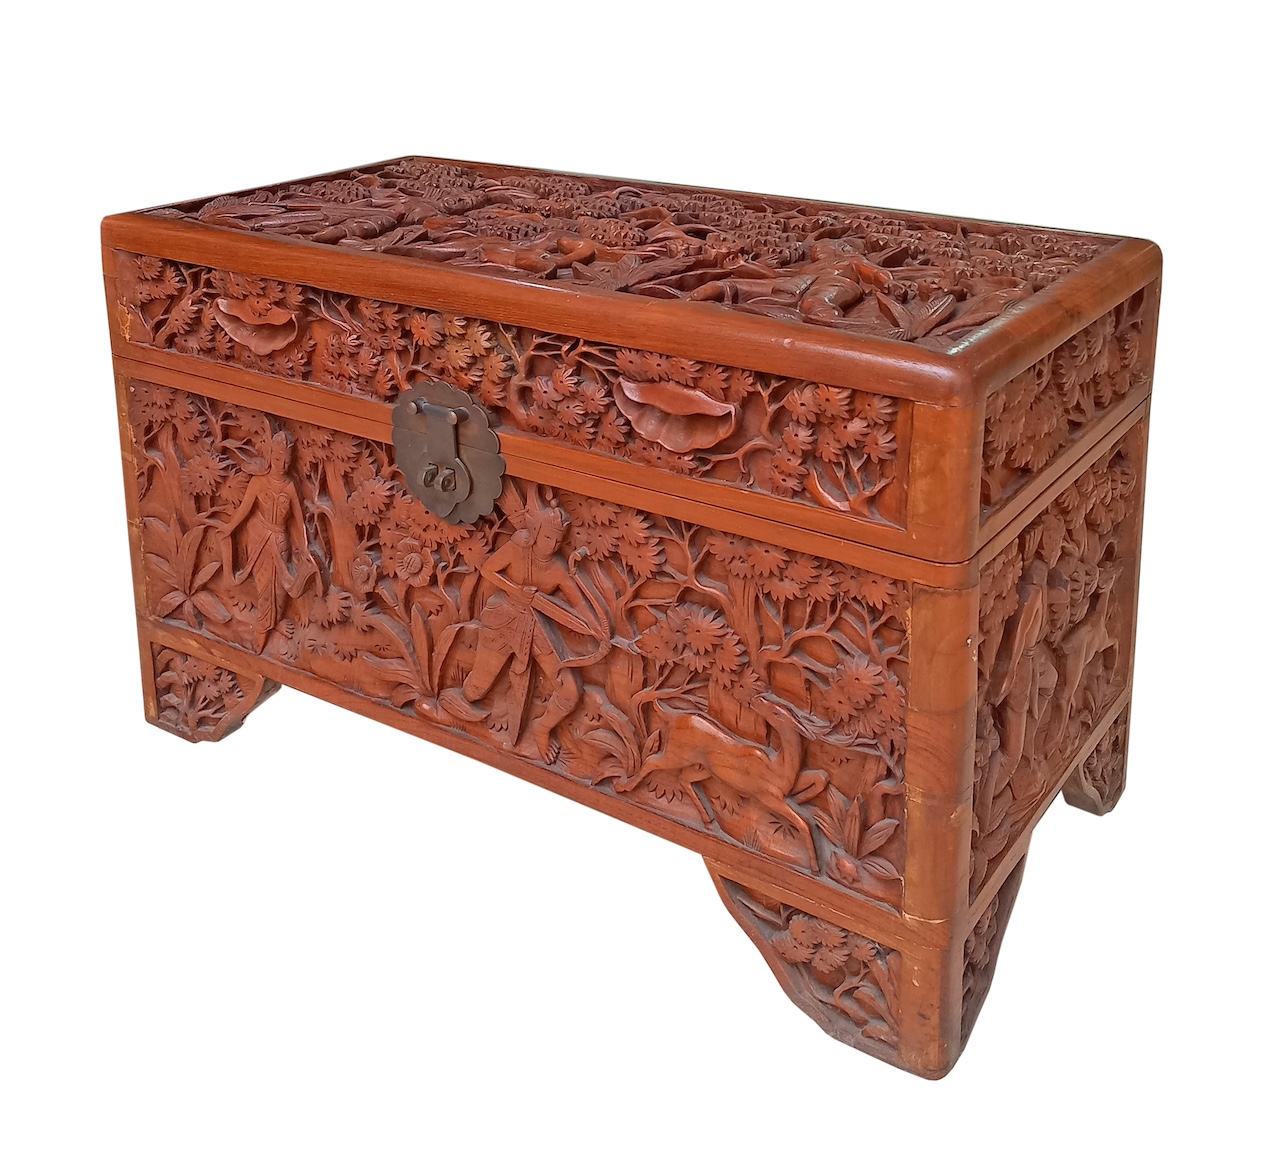 A carved teak chest wood Indonesia possibly Jepara circa 1980’s